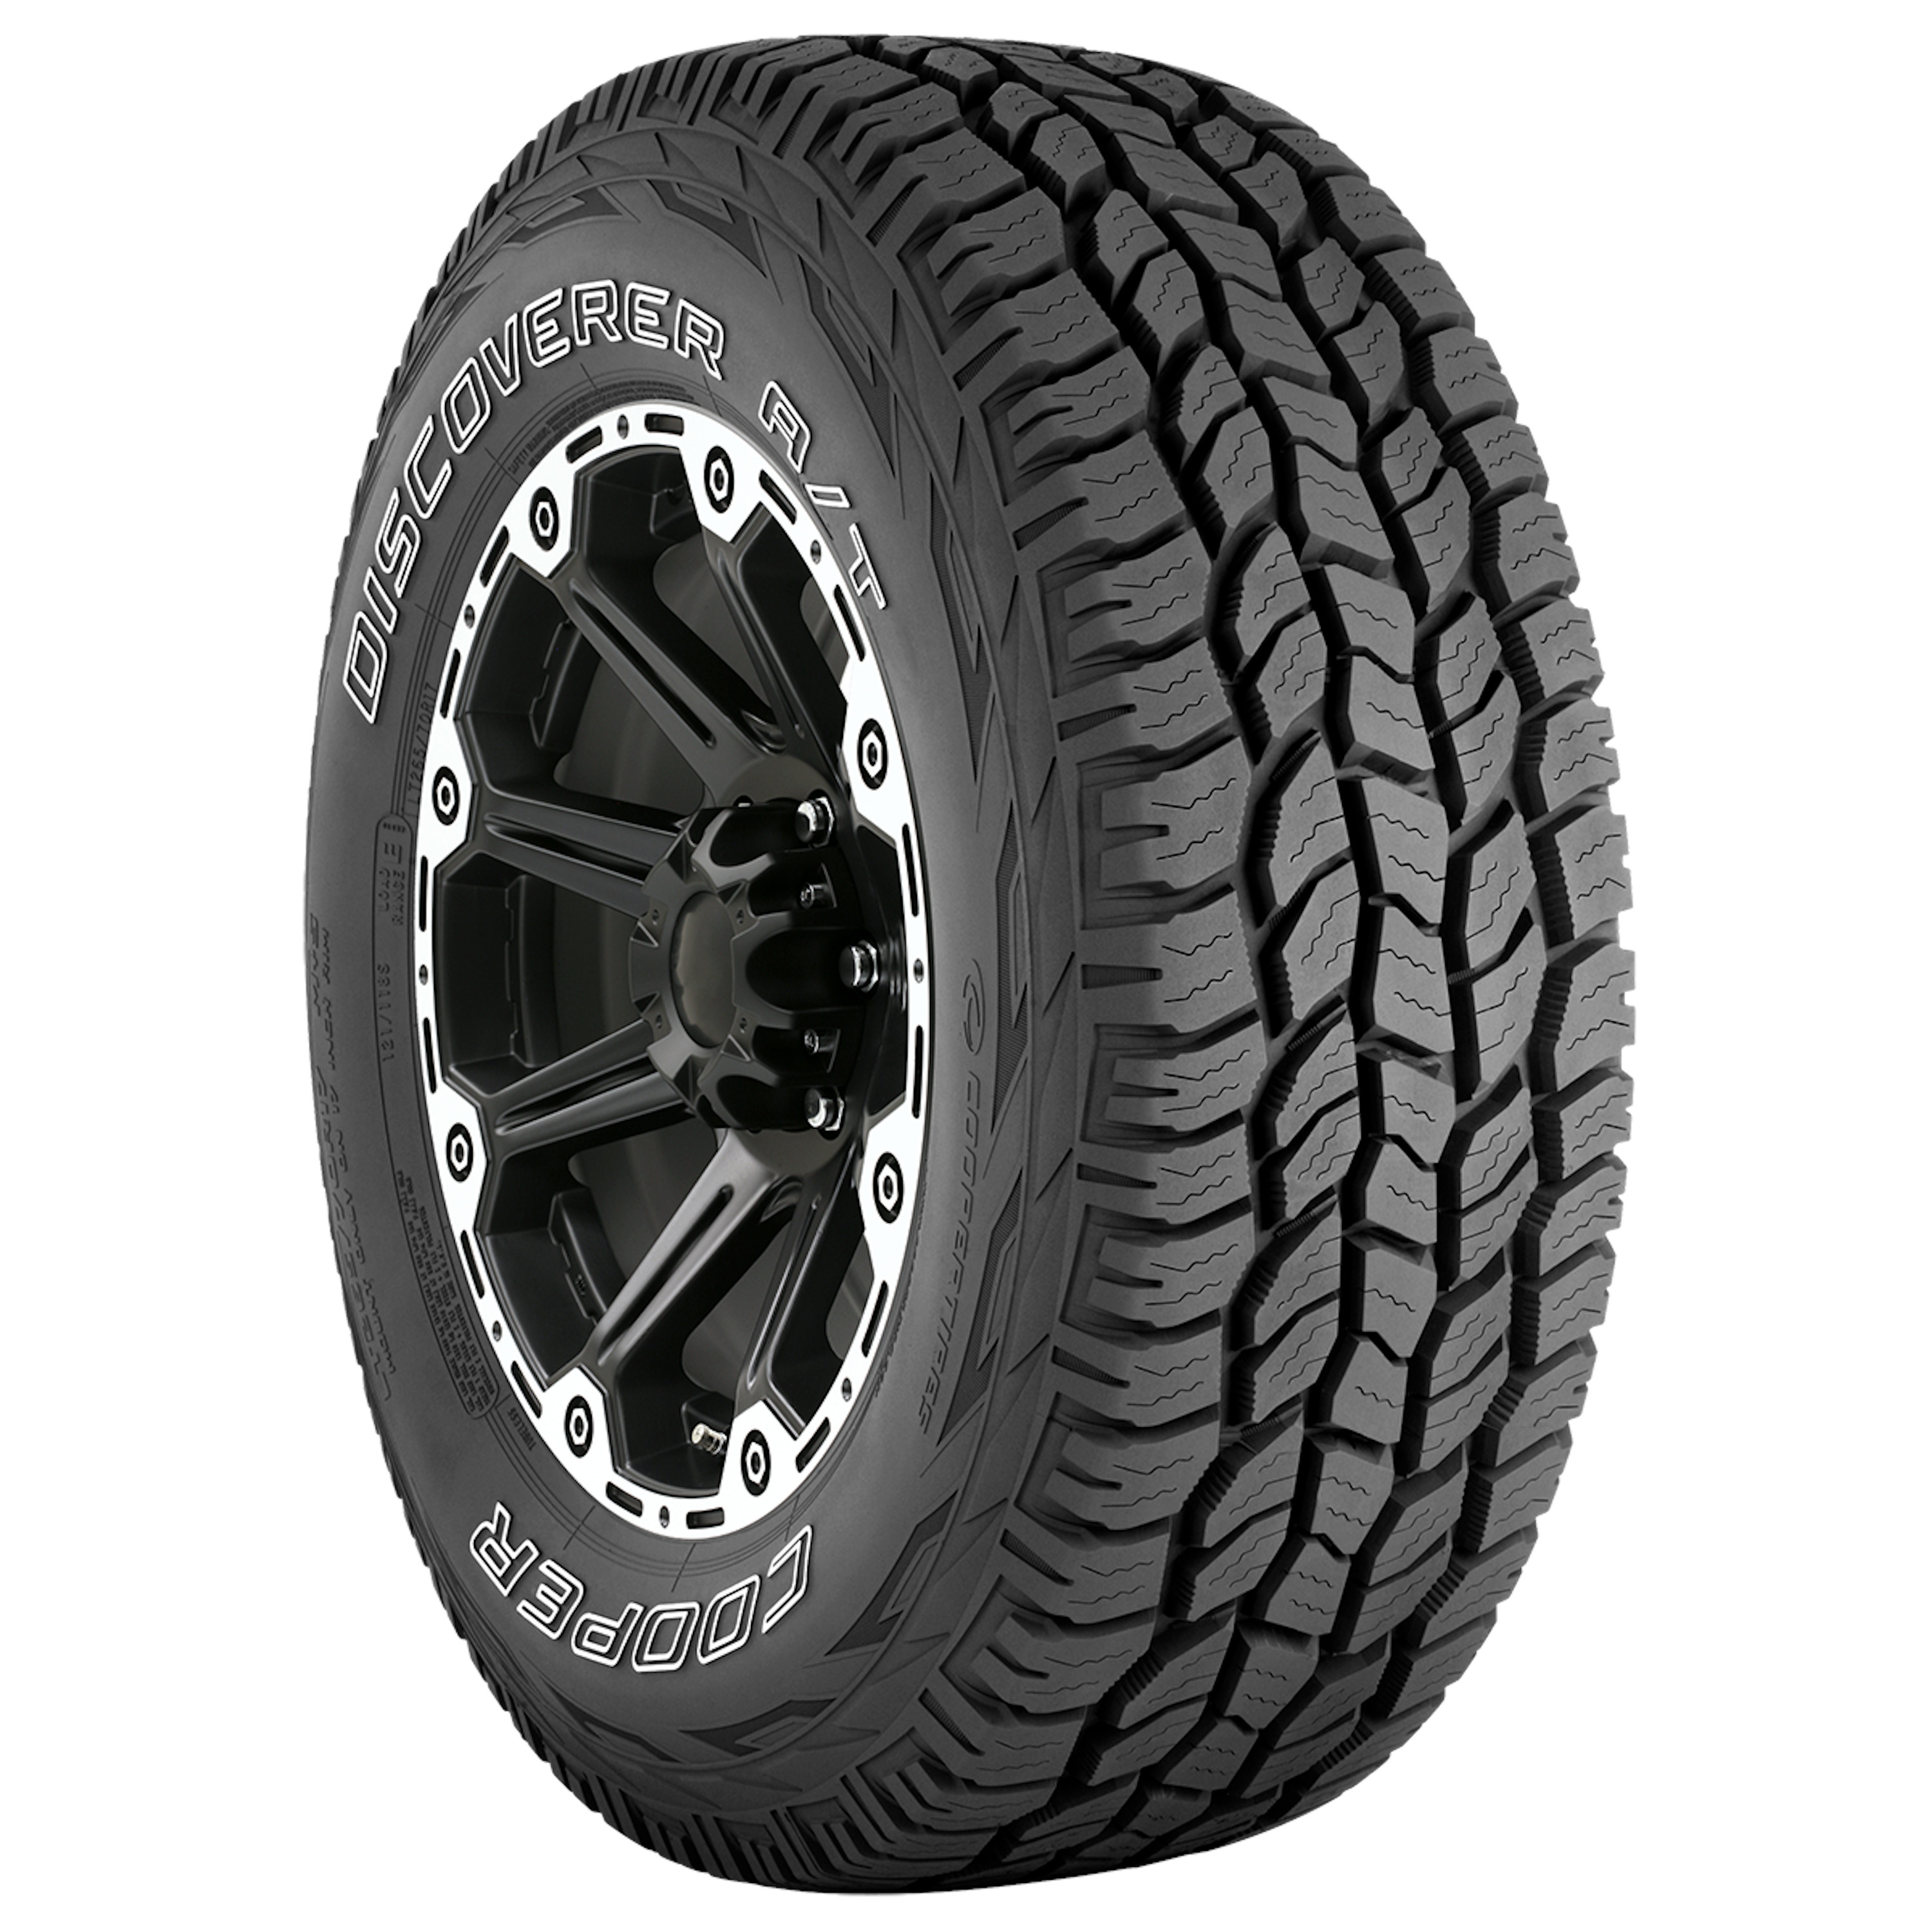 Cooper Discoverer A/T All-Season 275/55R20 117T Tire Fits: 2014-18 Chevrolet Silverado 1500 High Country, 2011-18 GMC Sierra 1500 Denali - image 5 of 8